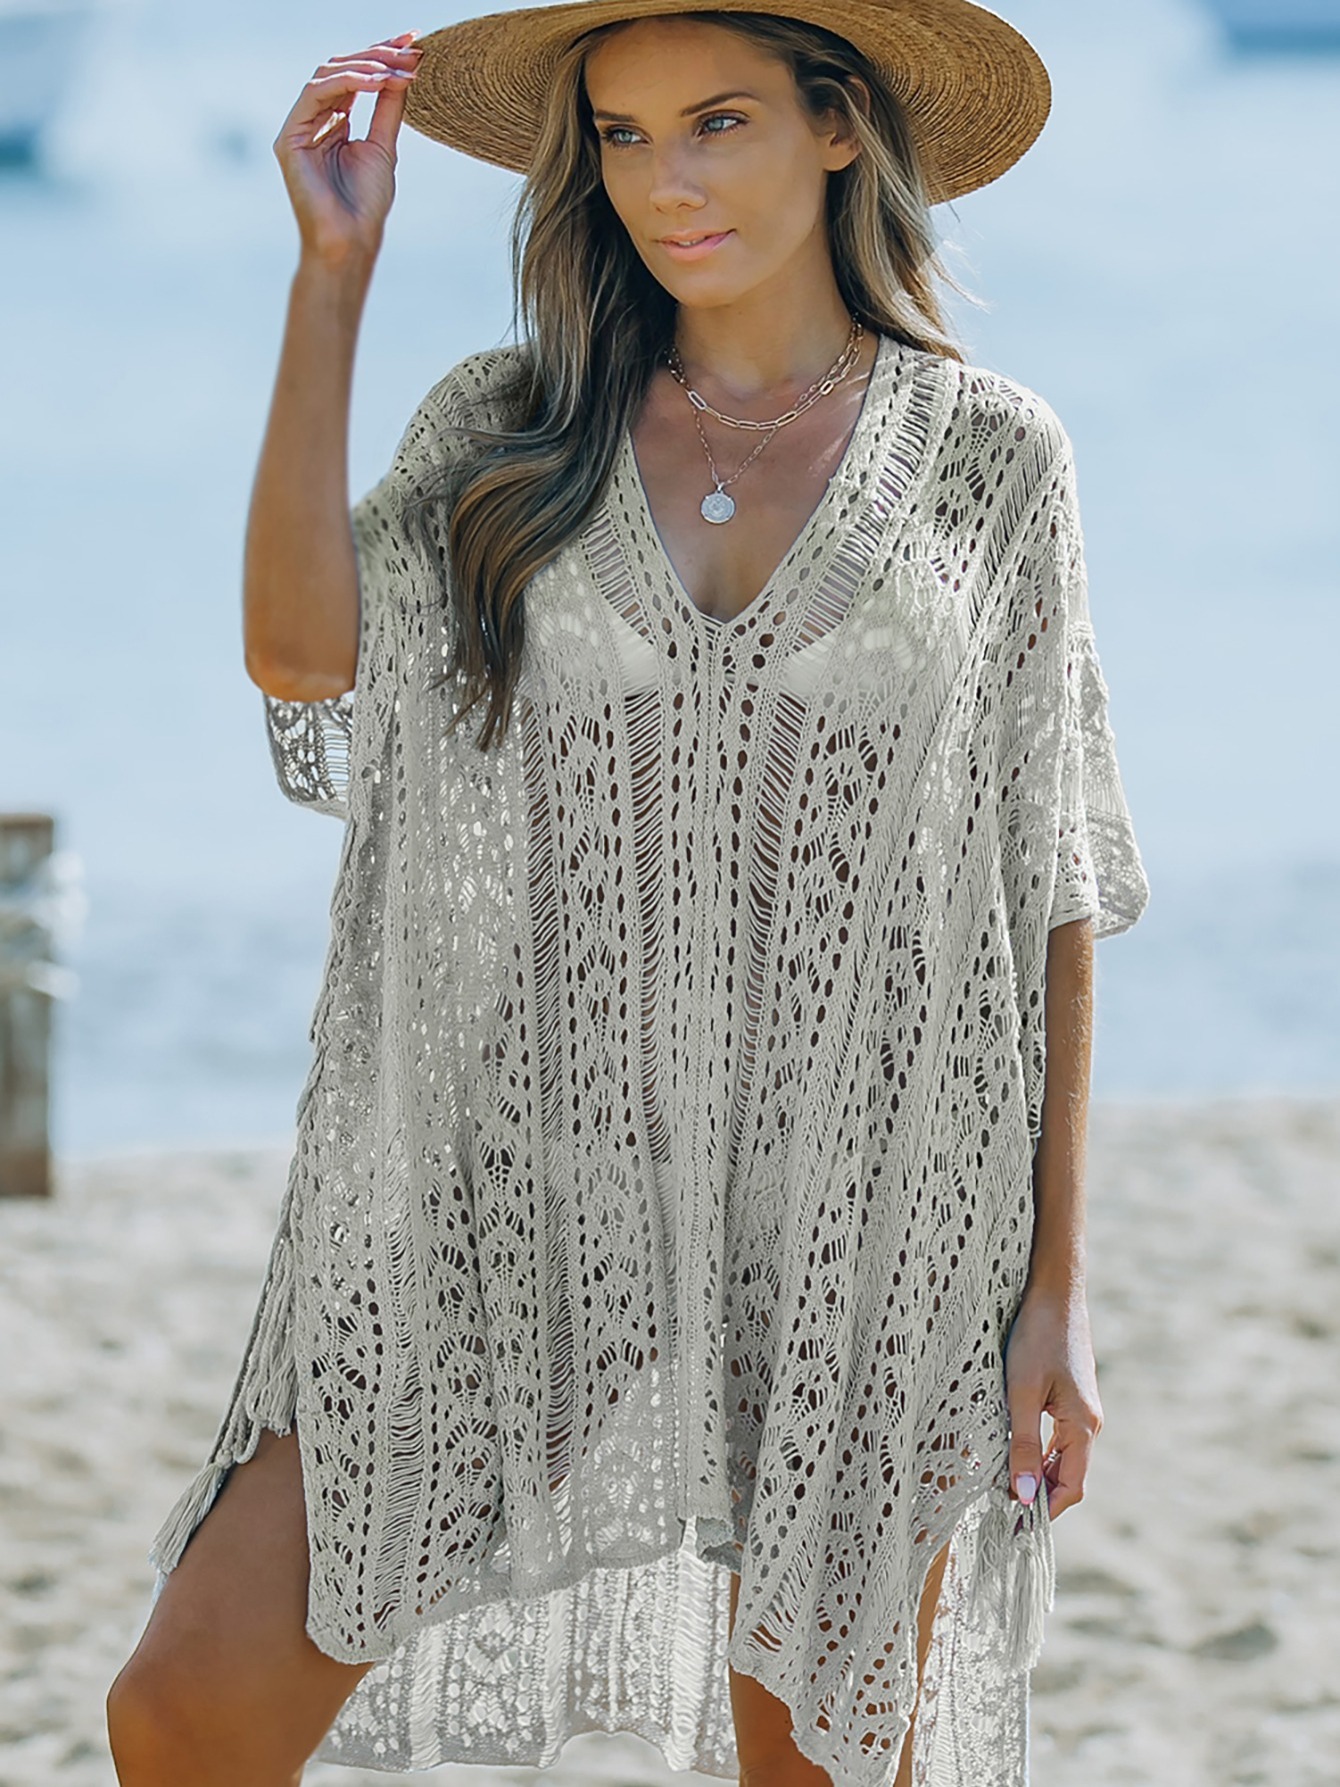 Cover Wander Agio Beach Swimsuit for Women Sleeve Coverups Bikini Cover Up  Shirt Circle White at  Women's Clothing store